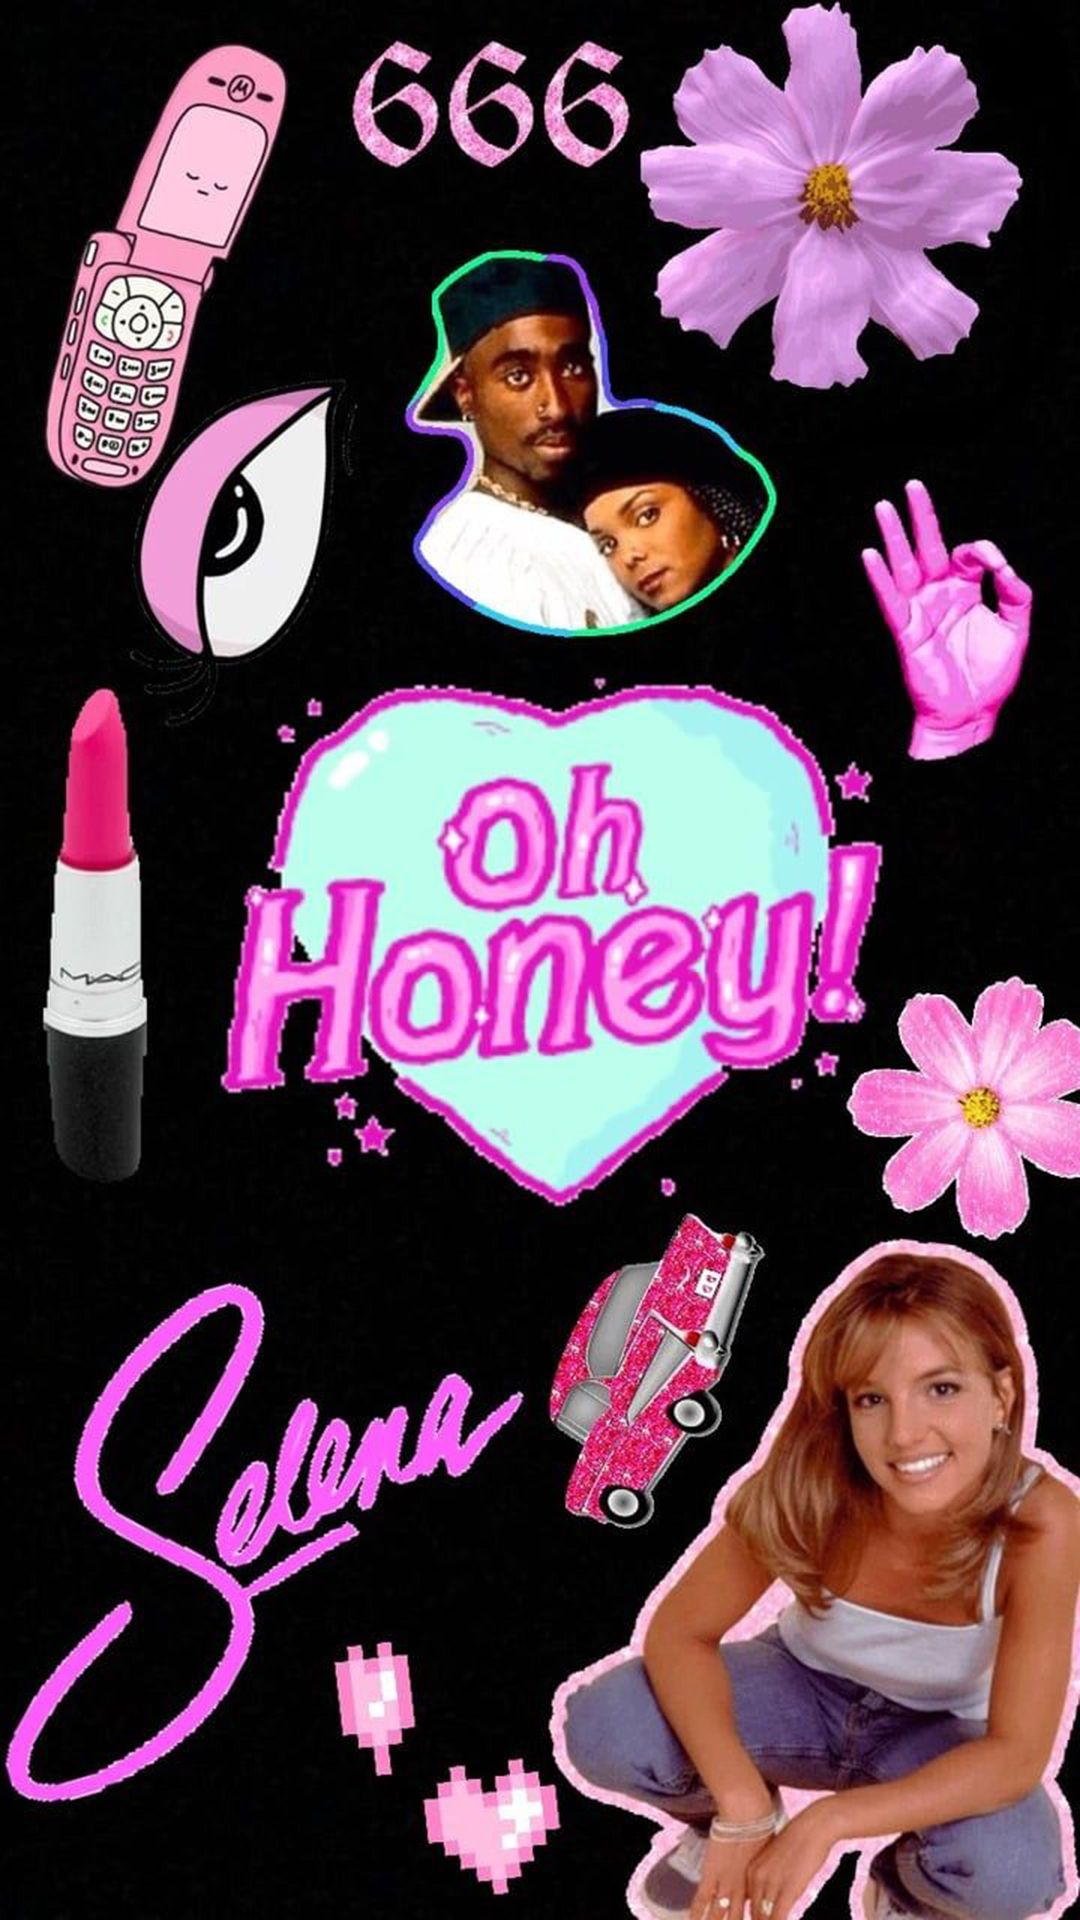 Aesthetic wallpaper for iPhone with elements of pink, purple, and black. The image features a young woman, a heart, and the words 'oh honey'. - 90s